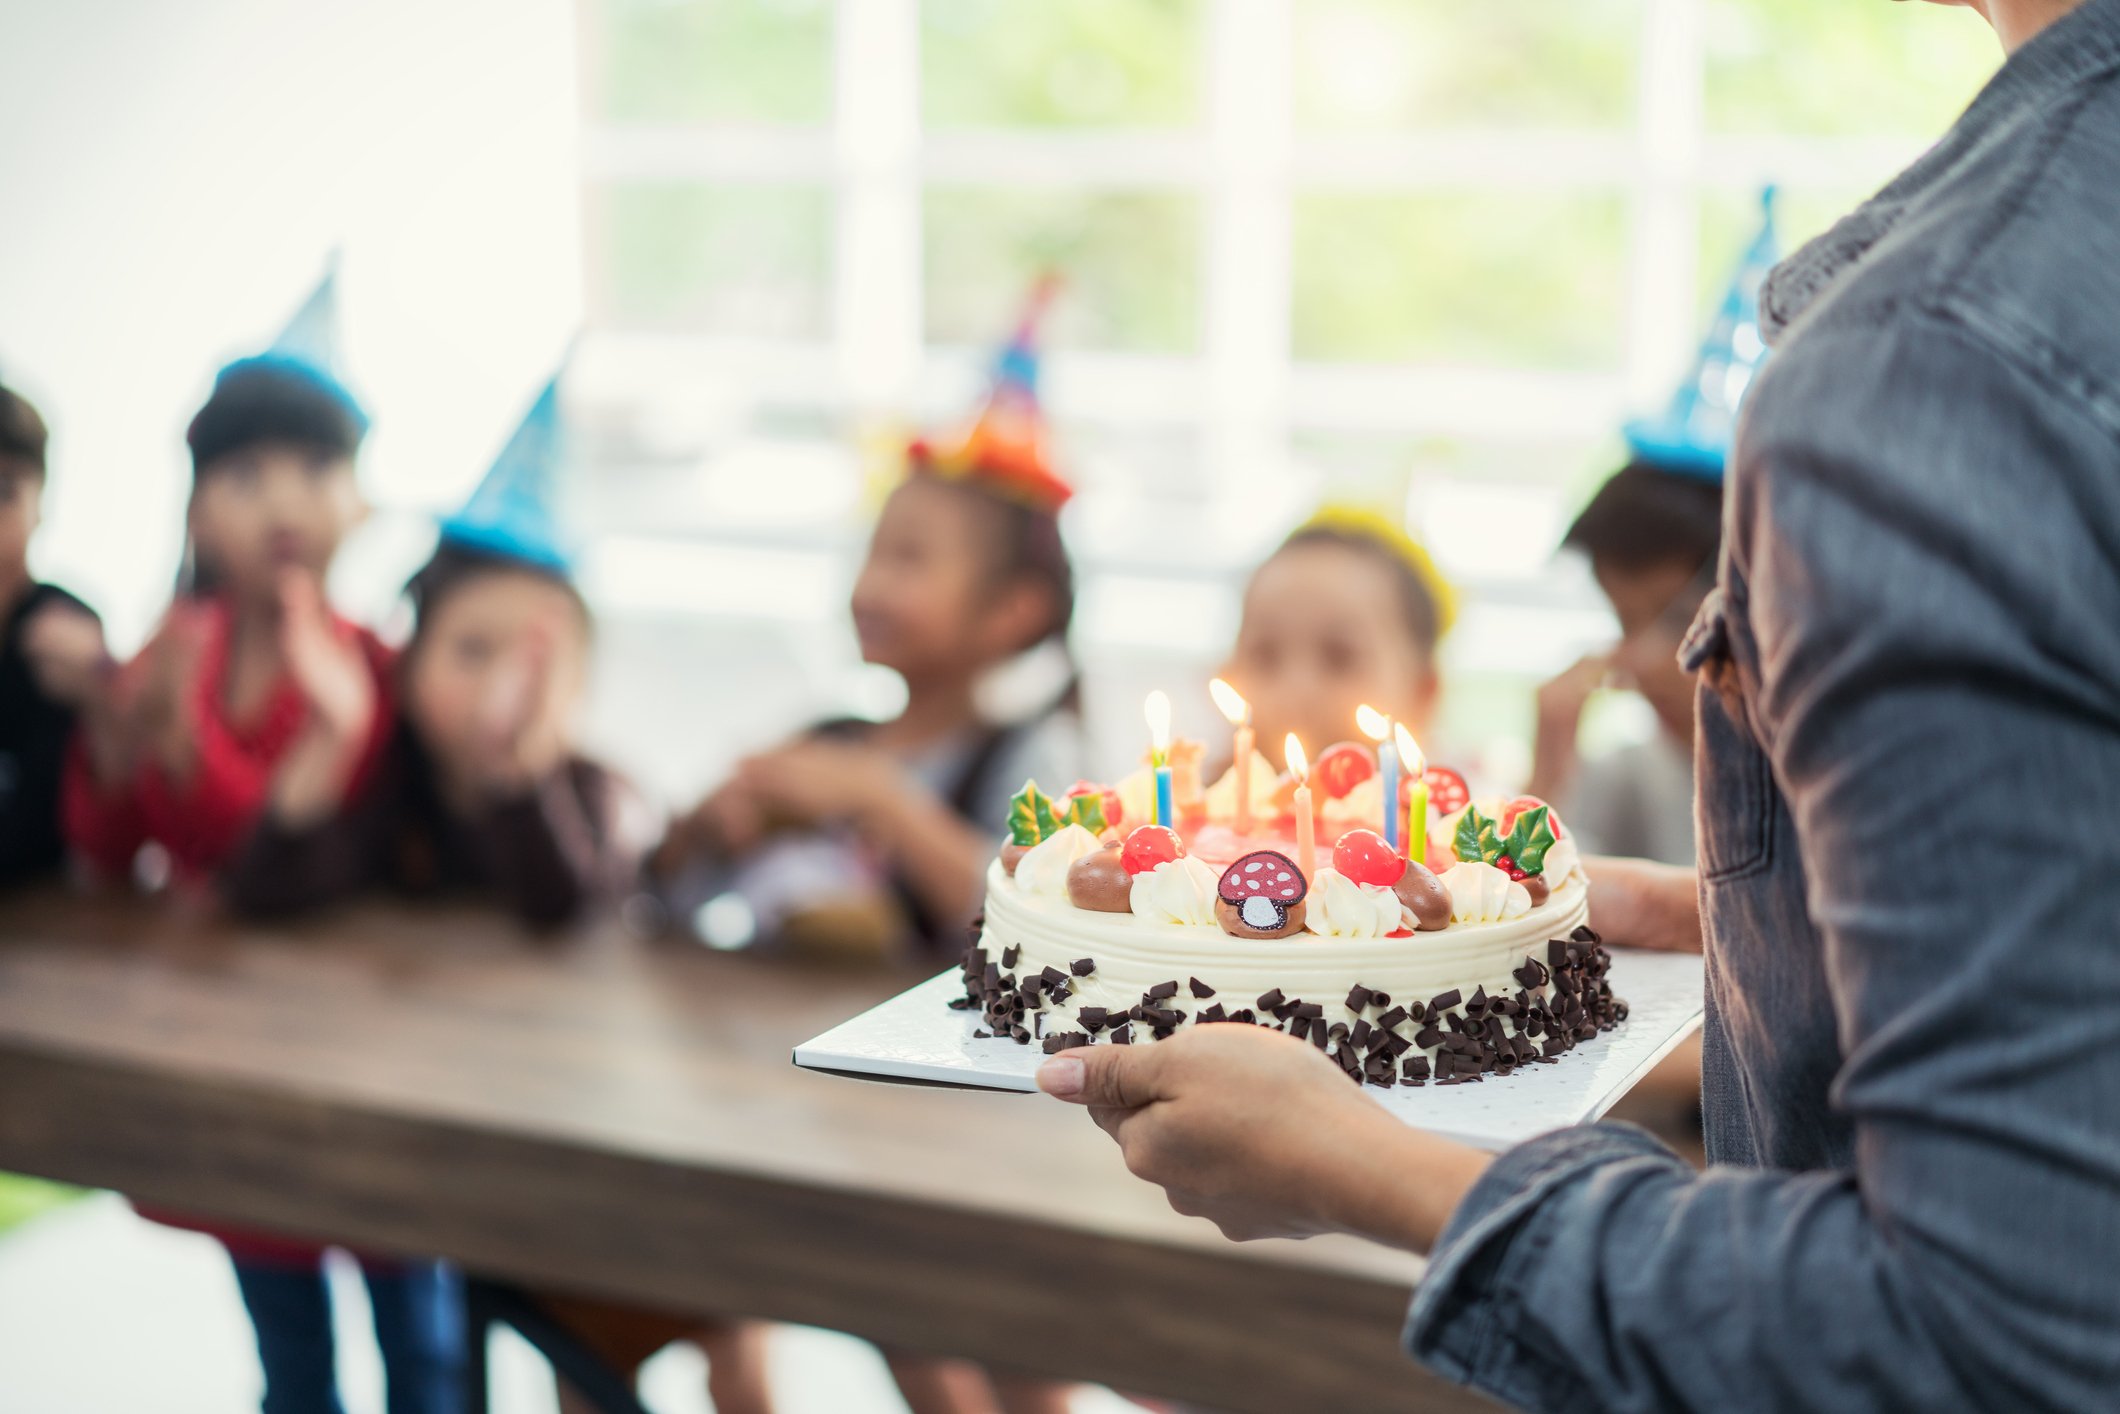 A man demanded that his brother-in-law leave his daughter's birthday party. | Photo: Getty Images